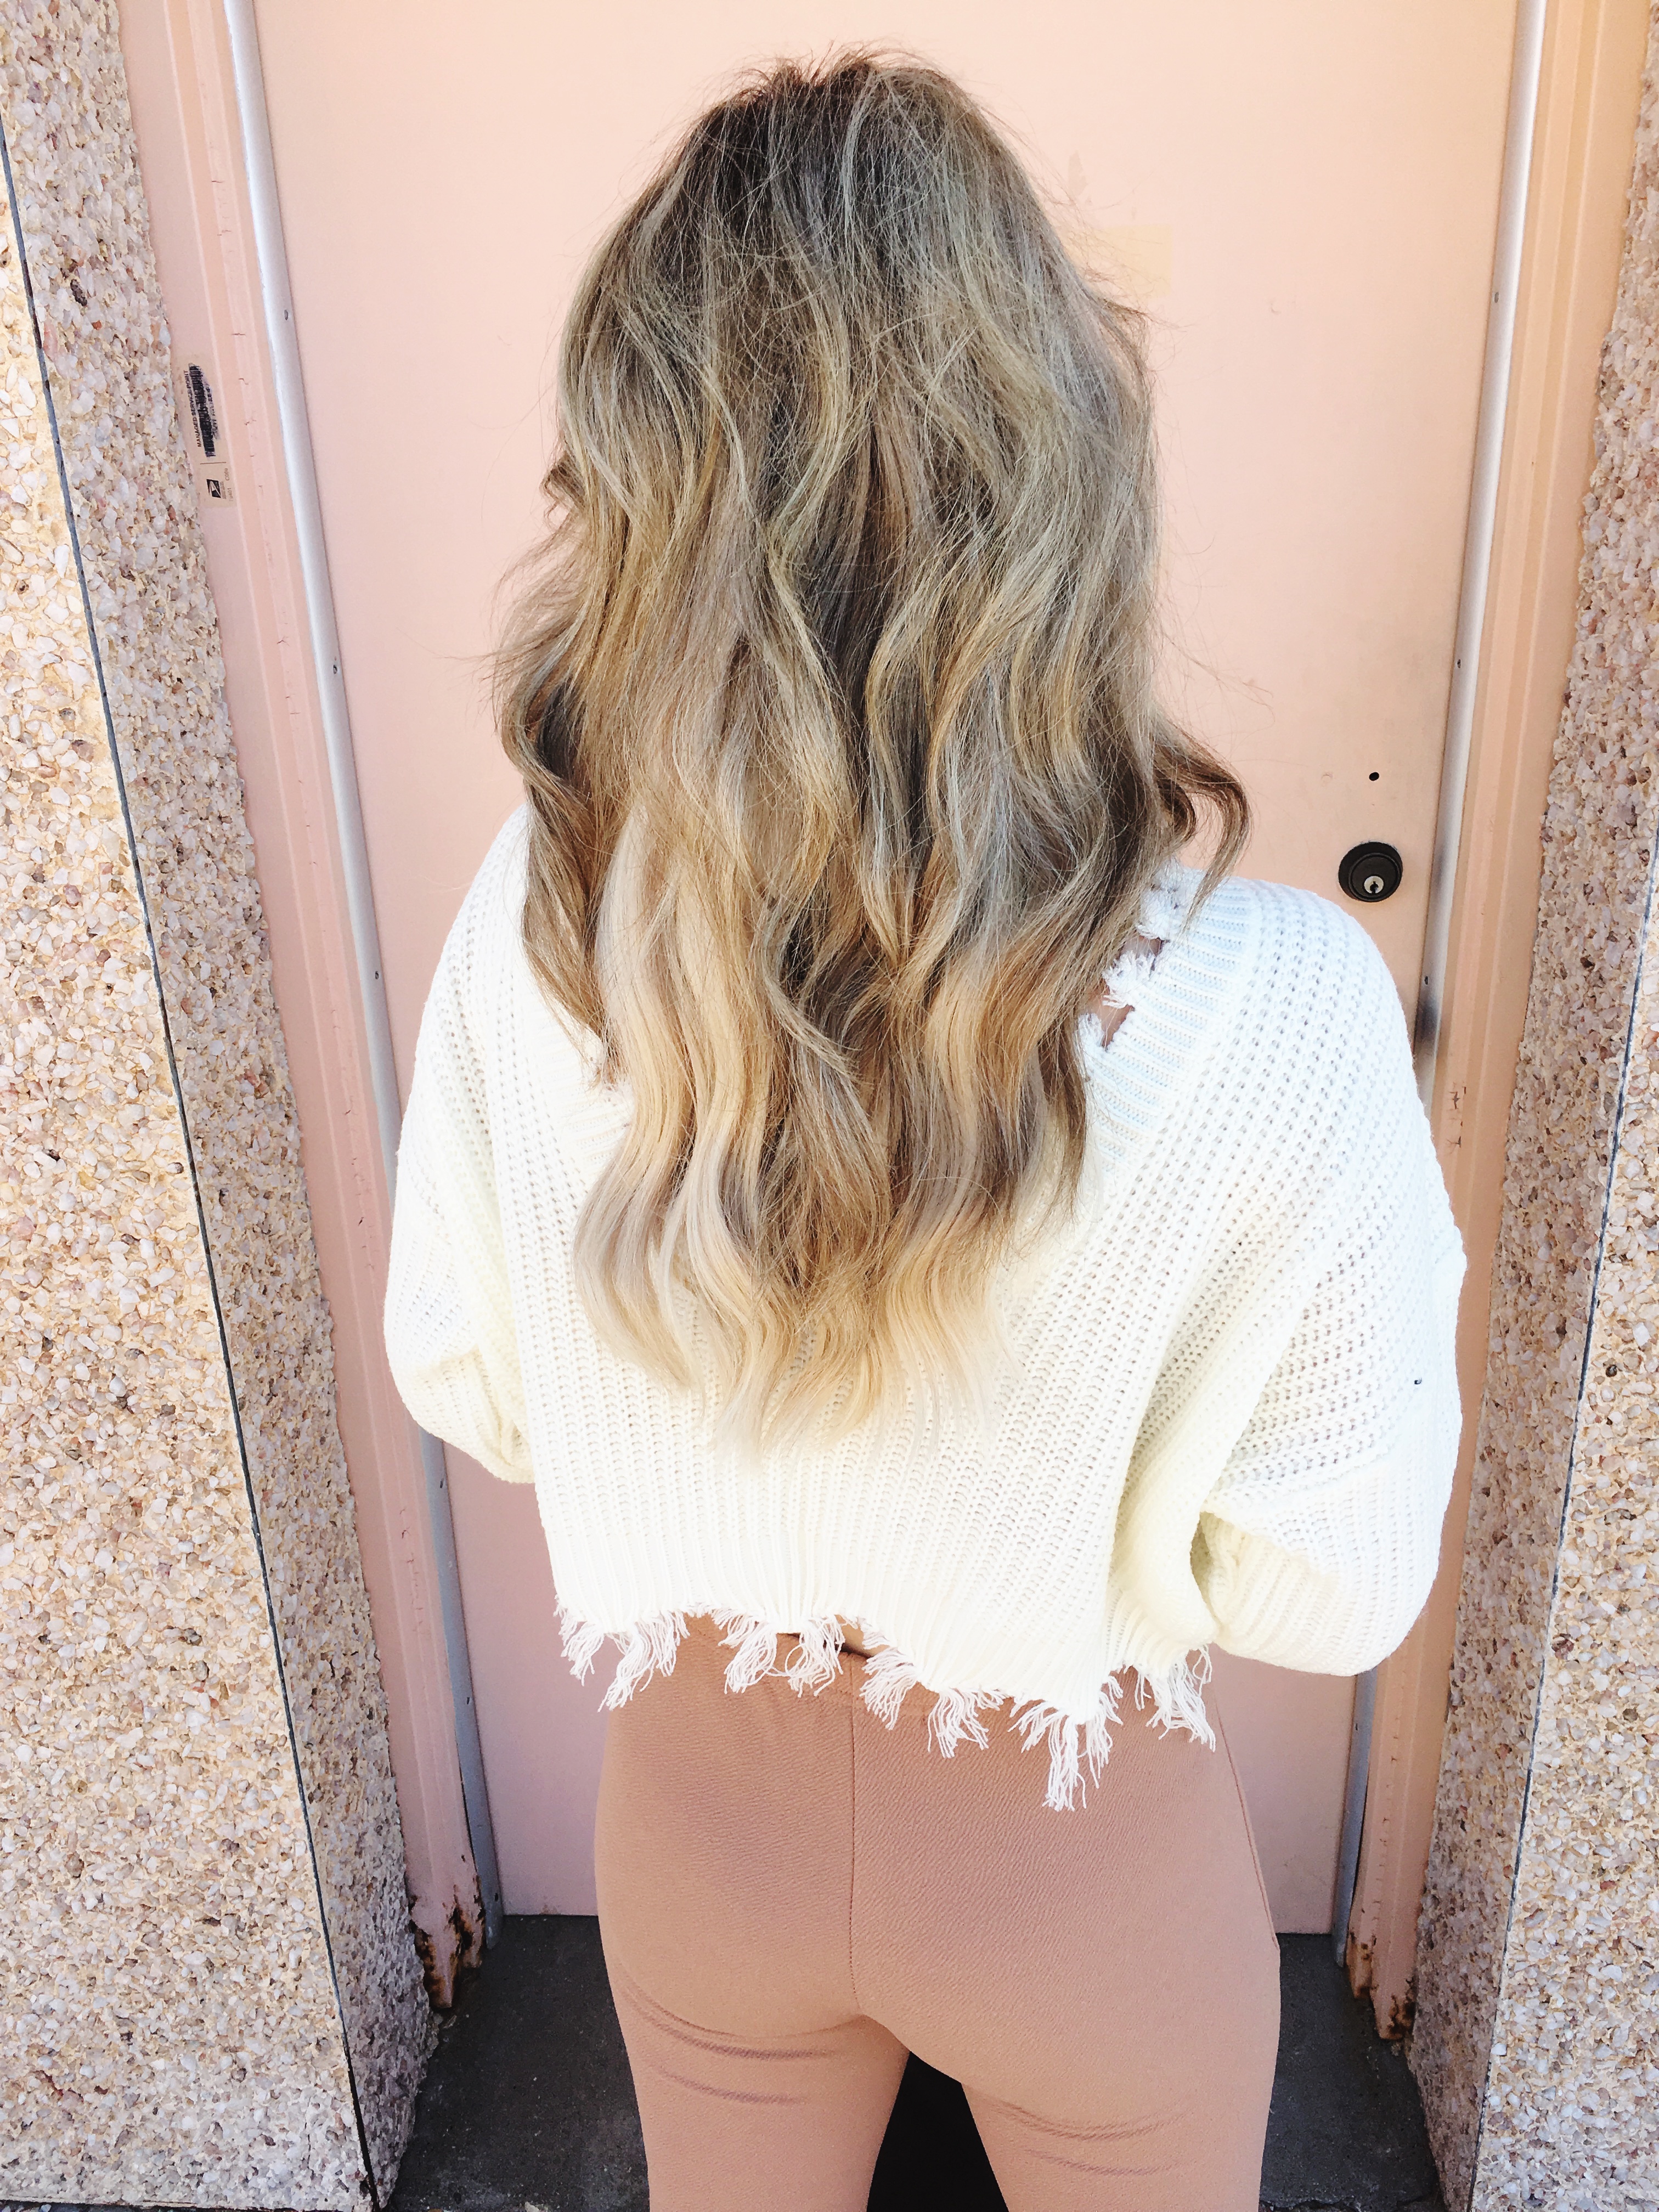 ALL ABOUT MY EXTENSIONS | HIDDEN CROWN HALO | Audrey Madison Stowe a fashion and lifestyle blog - HALO CROWN HAIR EXTENSIONS featured by popular Texas beauty blogger, Audrey Madison Stowe